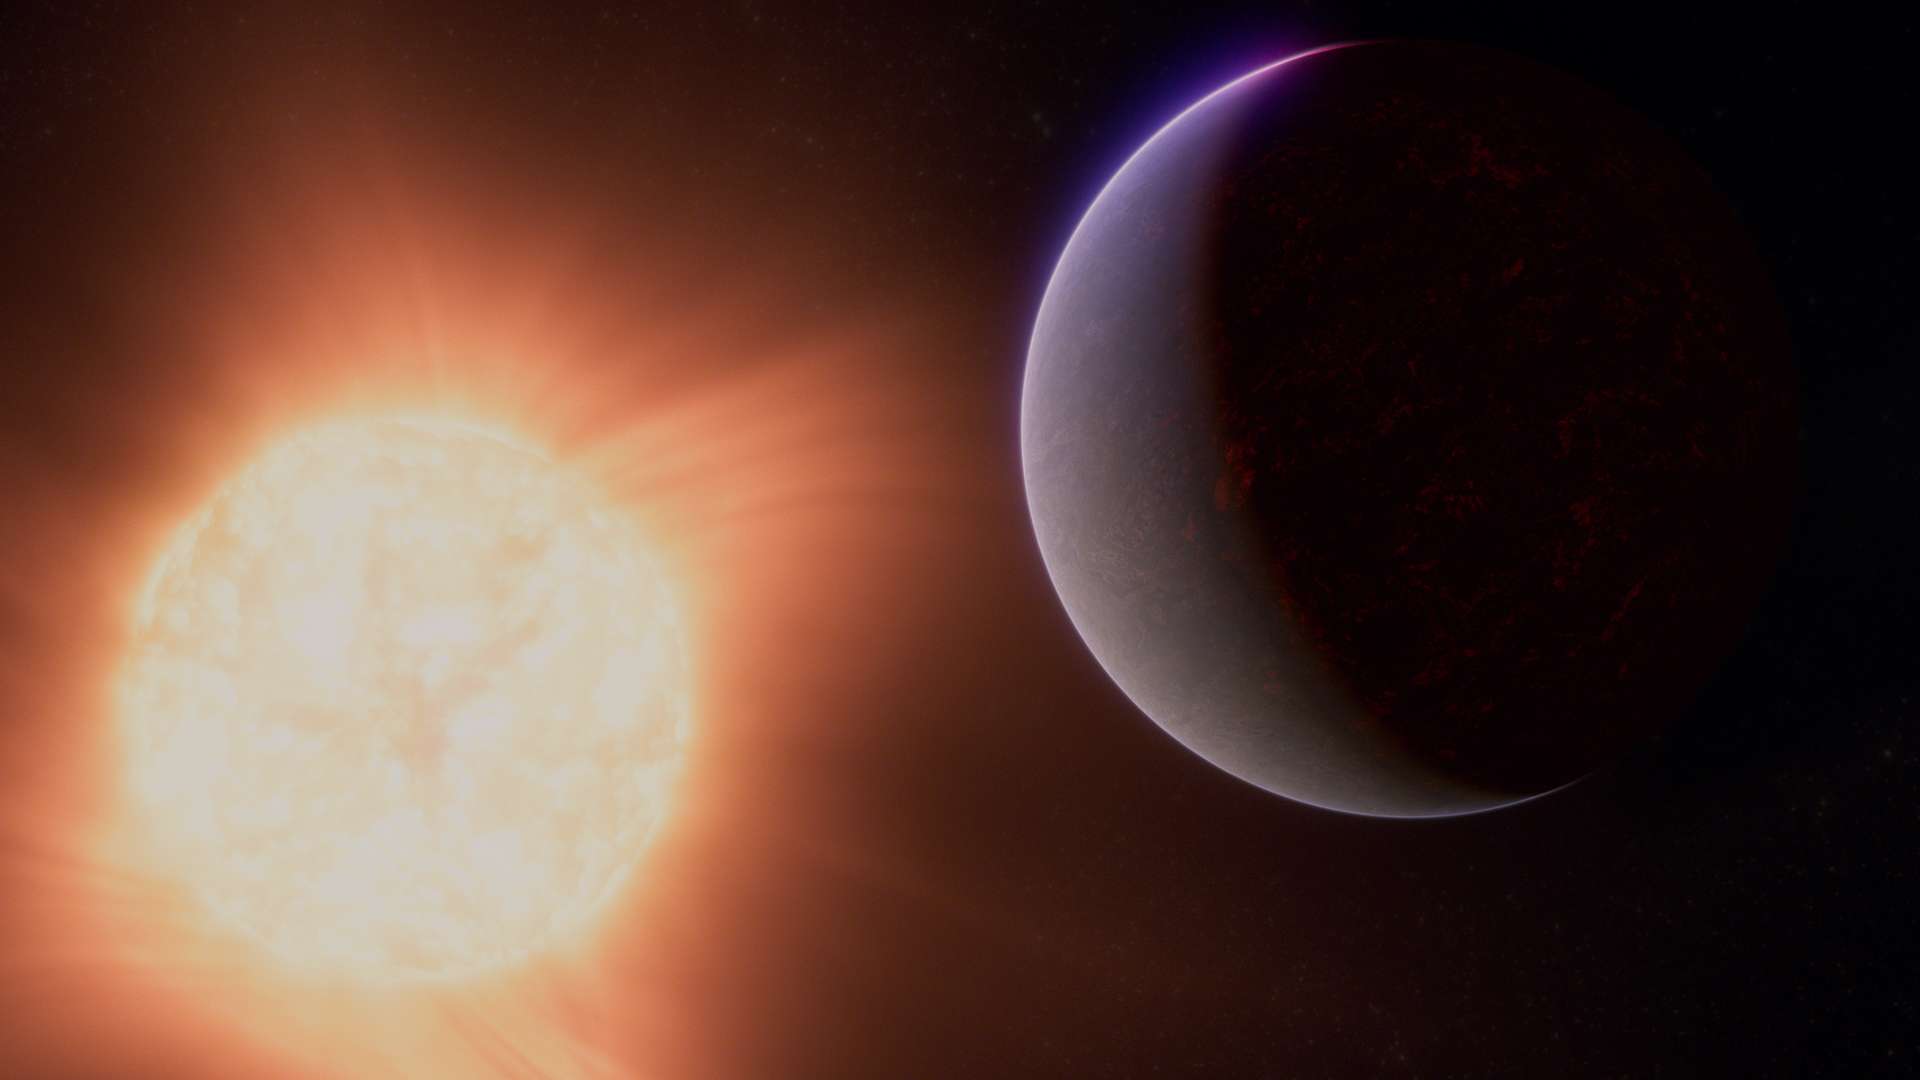 The James Webb Telescope would have discovered the first atmosphere around a rocky planet in another solar system!